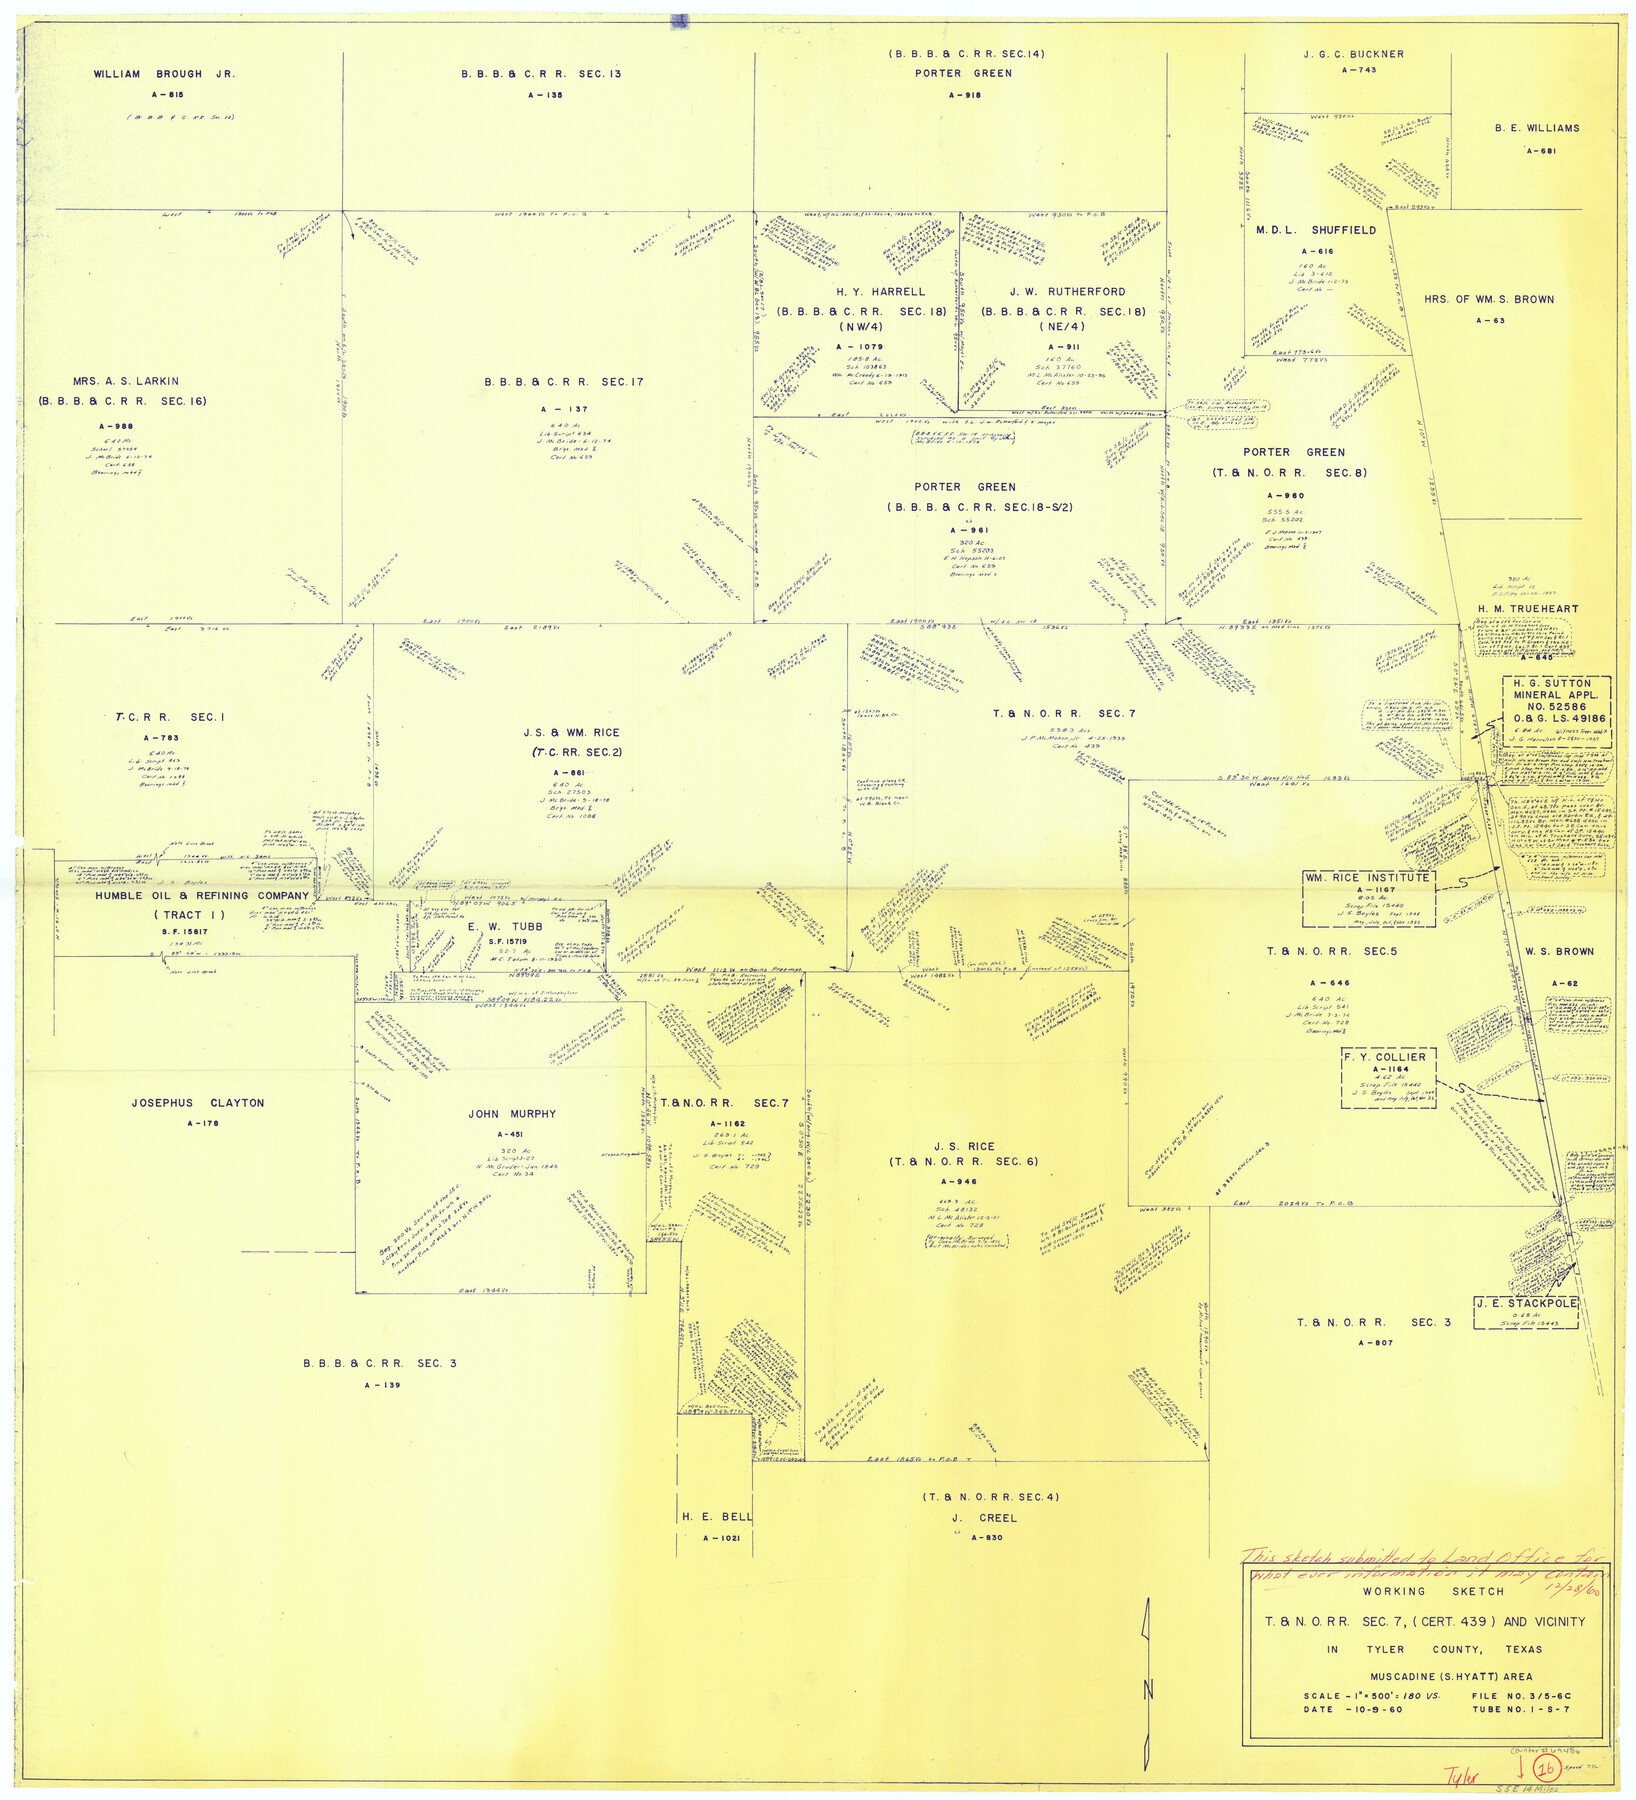 69486, Tyler County Working Sketch 16, General Map Collection